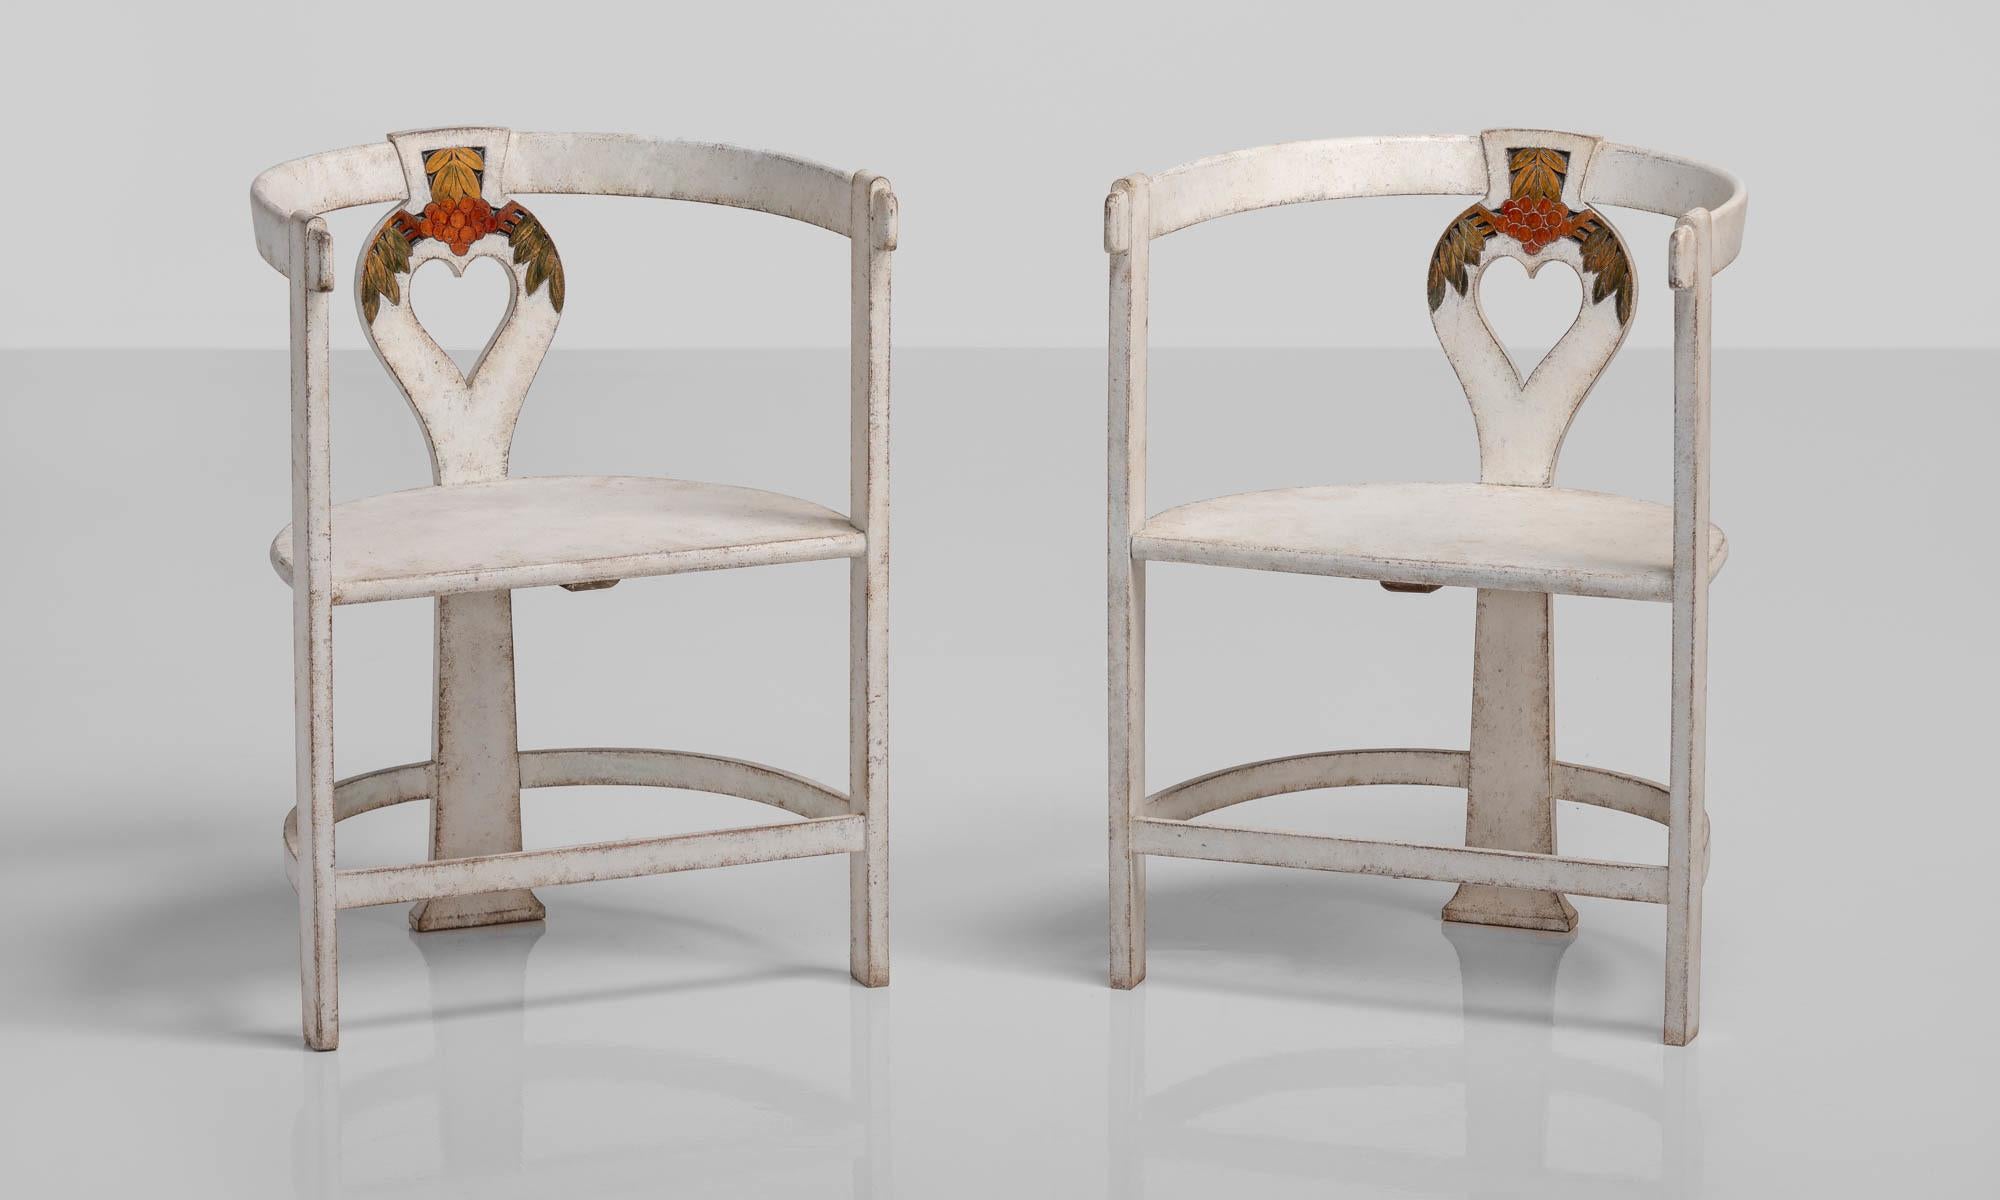 Rare pair of artists chairs, Sweden, circa 1910.

3-leg semi-circular form in original, beautifully patinated paint includes colorful detailing and a heart-shaped element in the back support.

Measures: 22